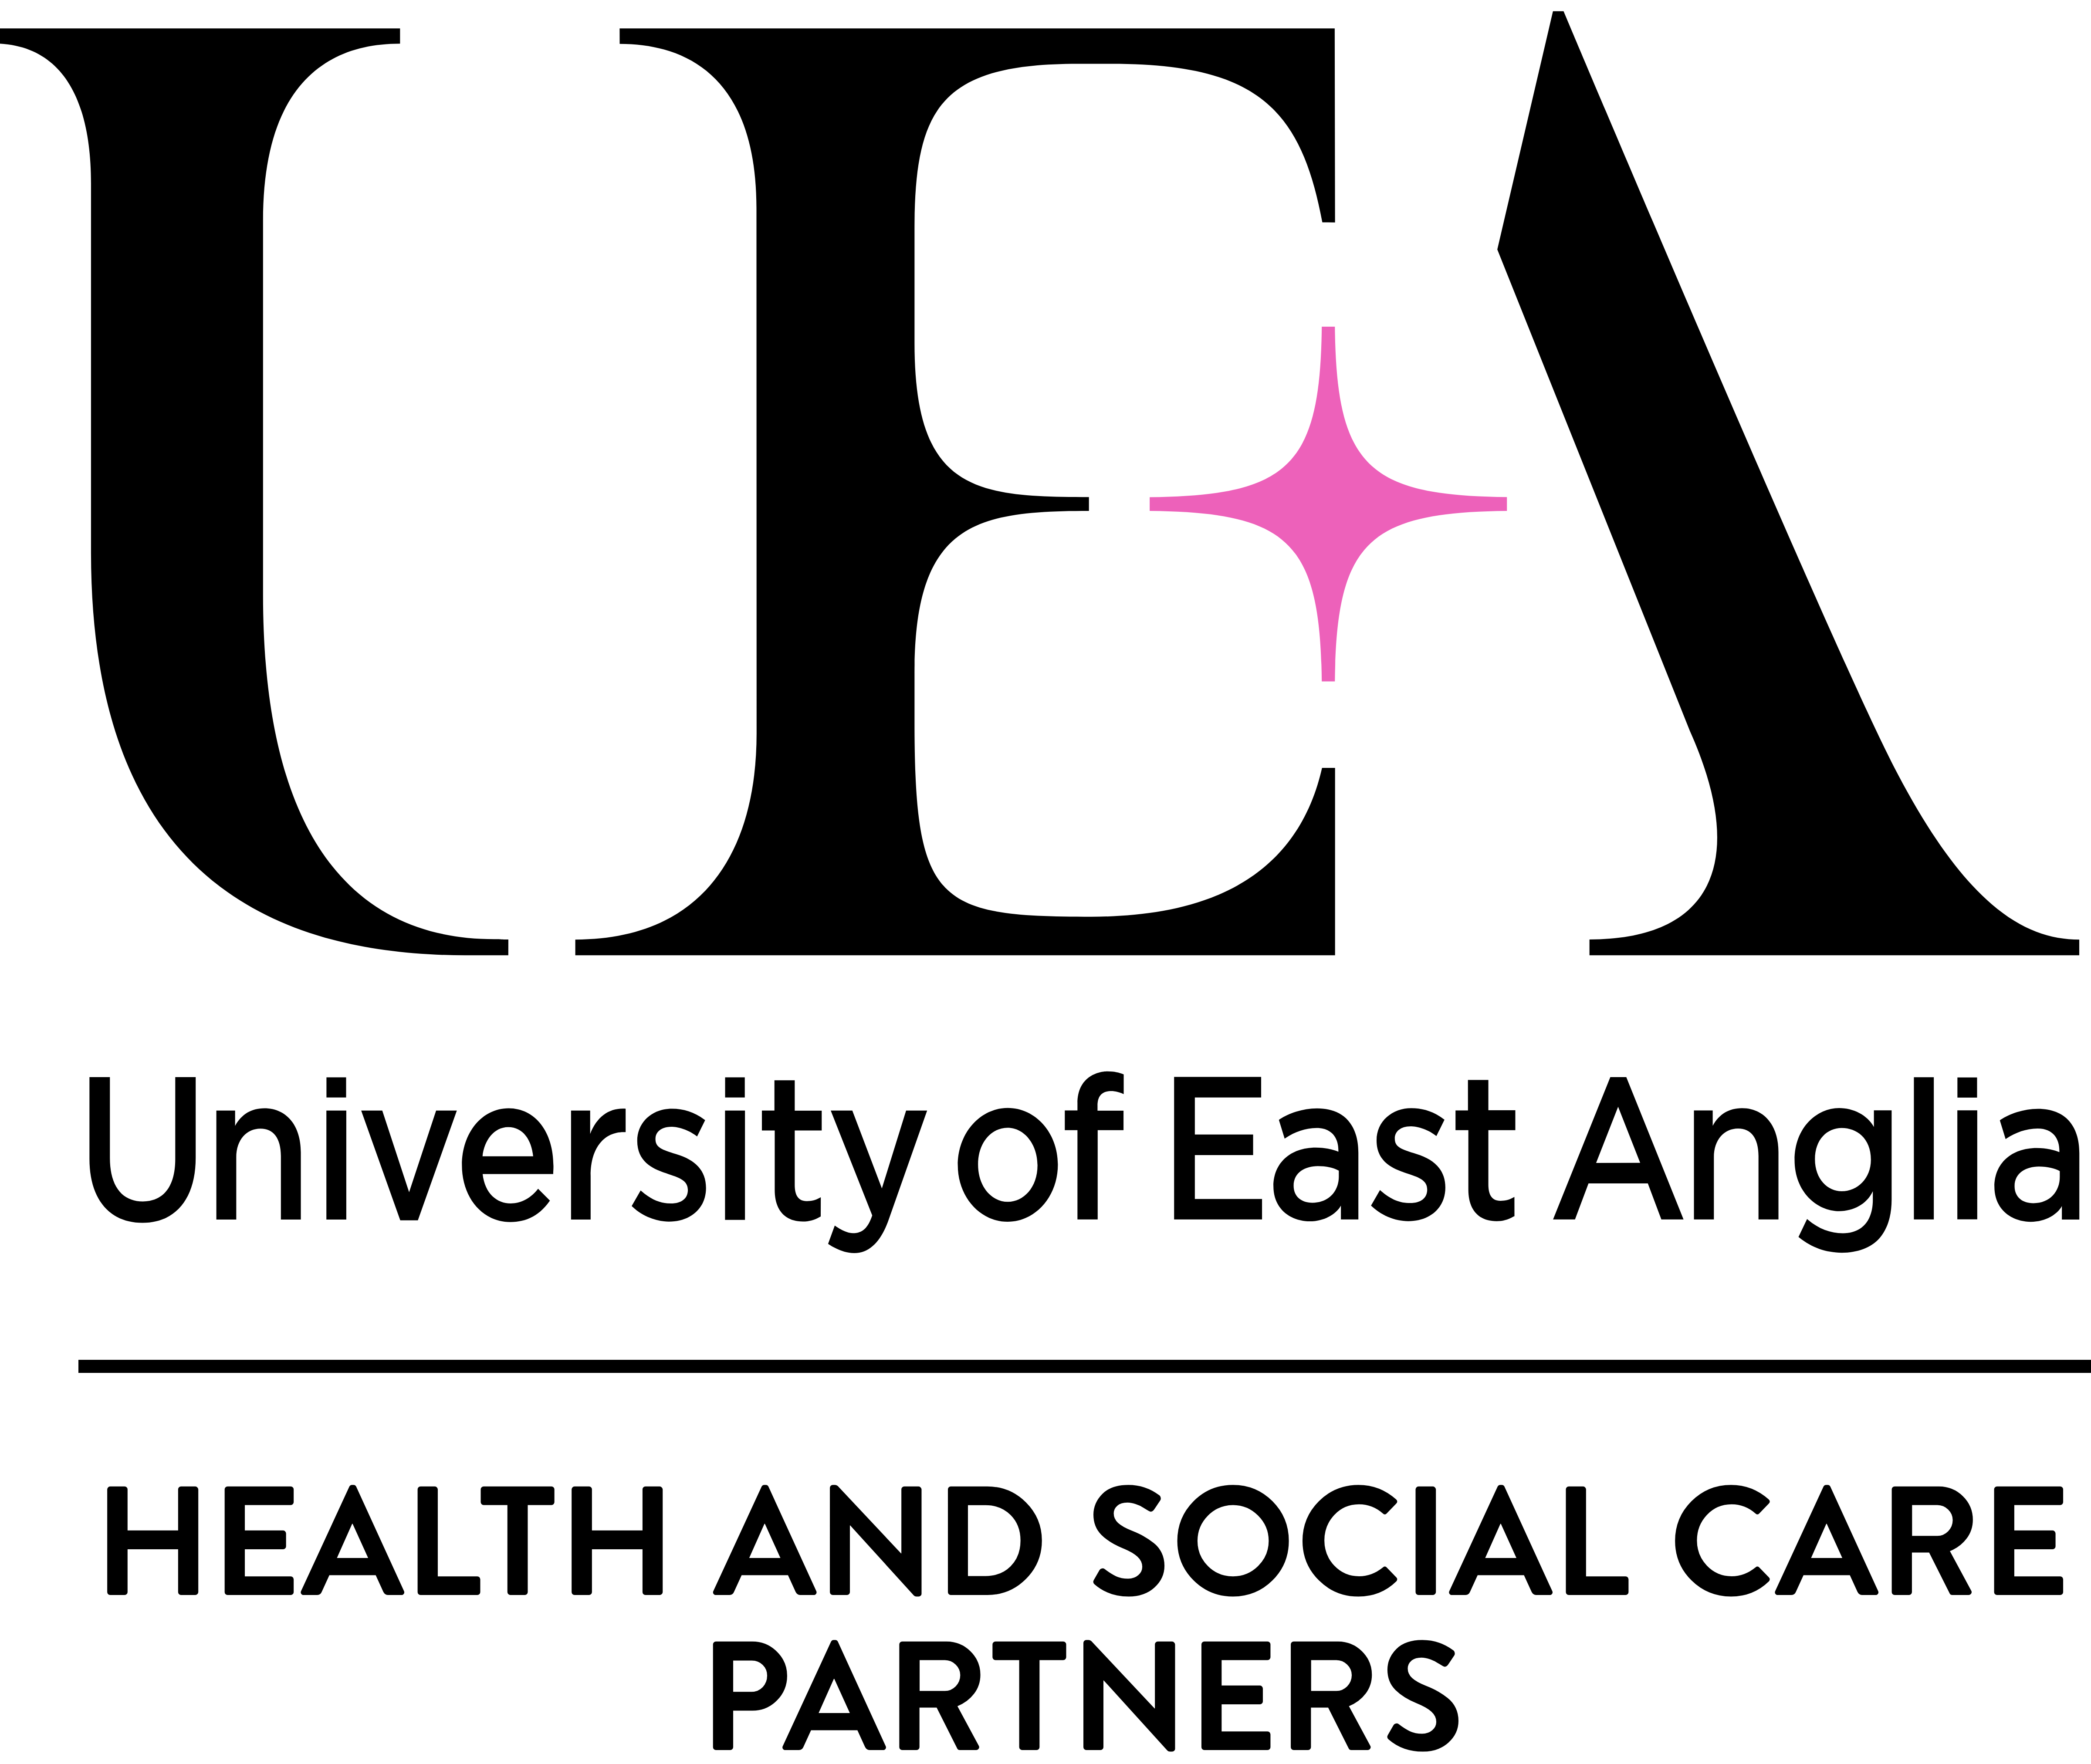 Capital letters spelling UEA with a pink star shape called a glint, forms the middle line of the E